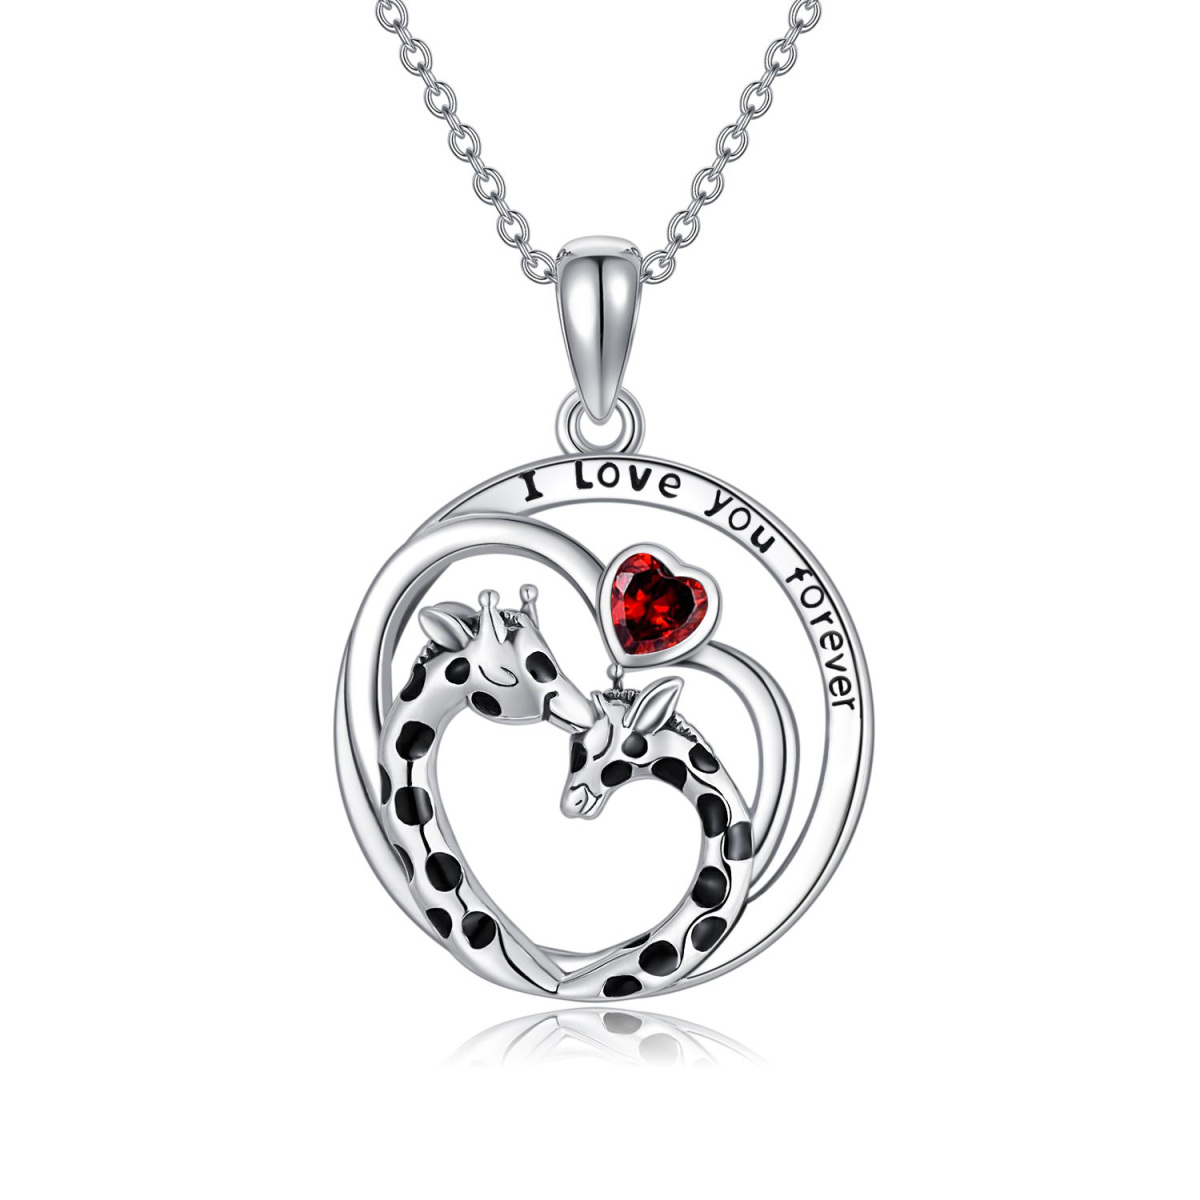 Sterling Silver Heart Shaped Cubic Zirconia Giraffe & Heart Pendant Necklace with Engraved Word-1